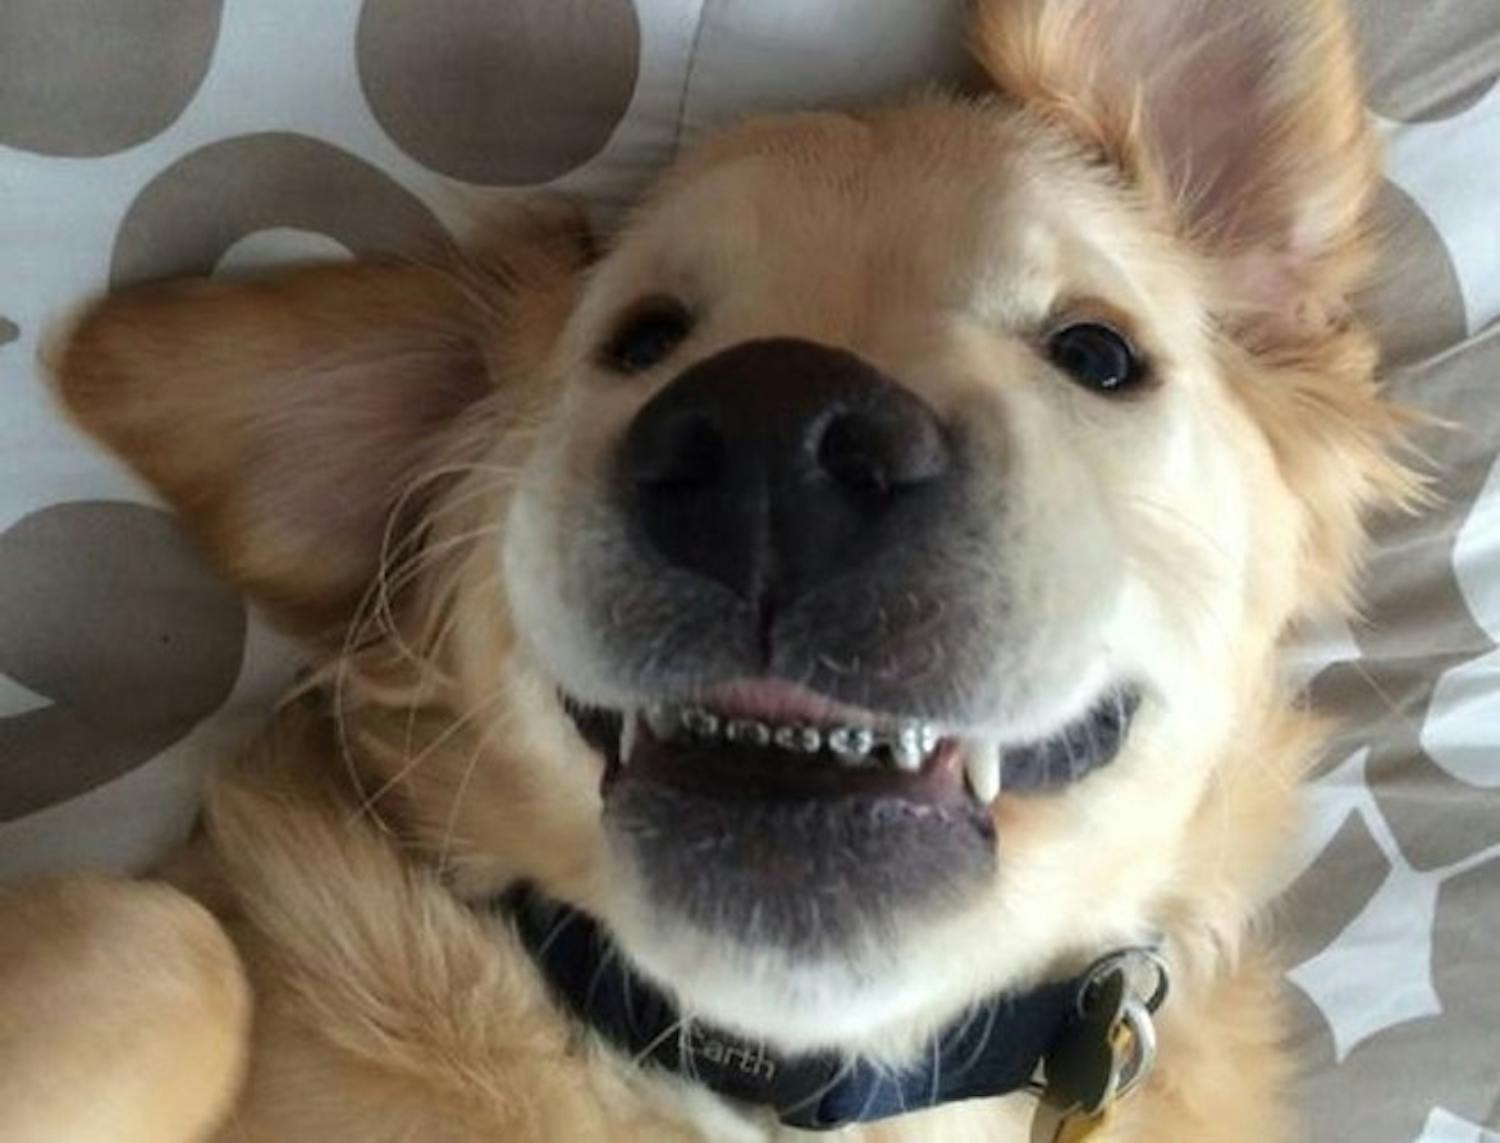 What do if your dog has crooked teeth